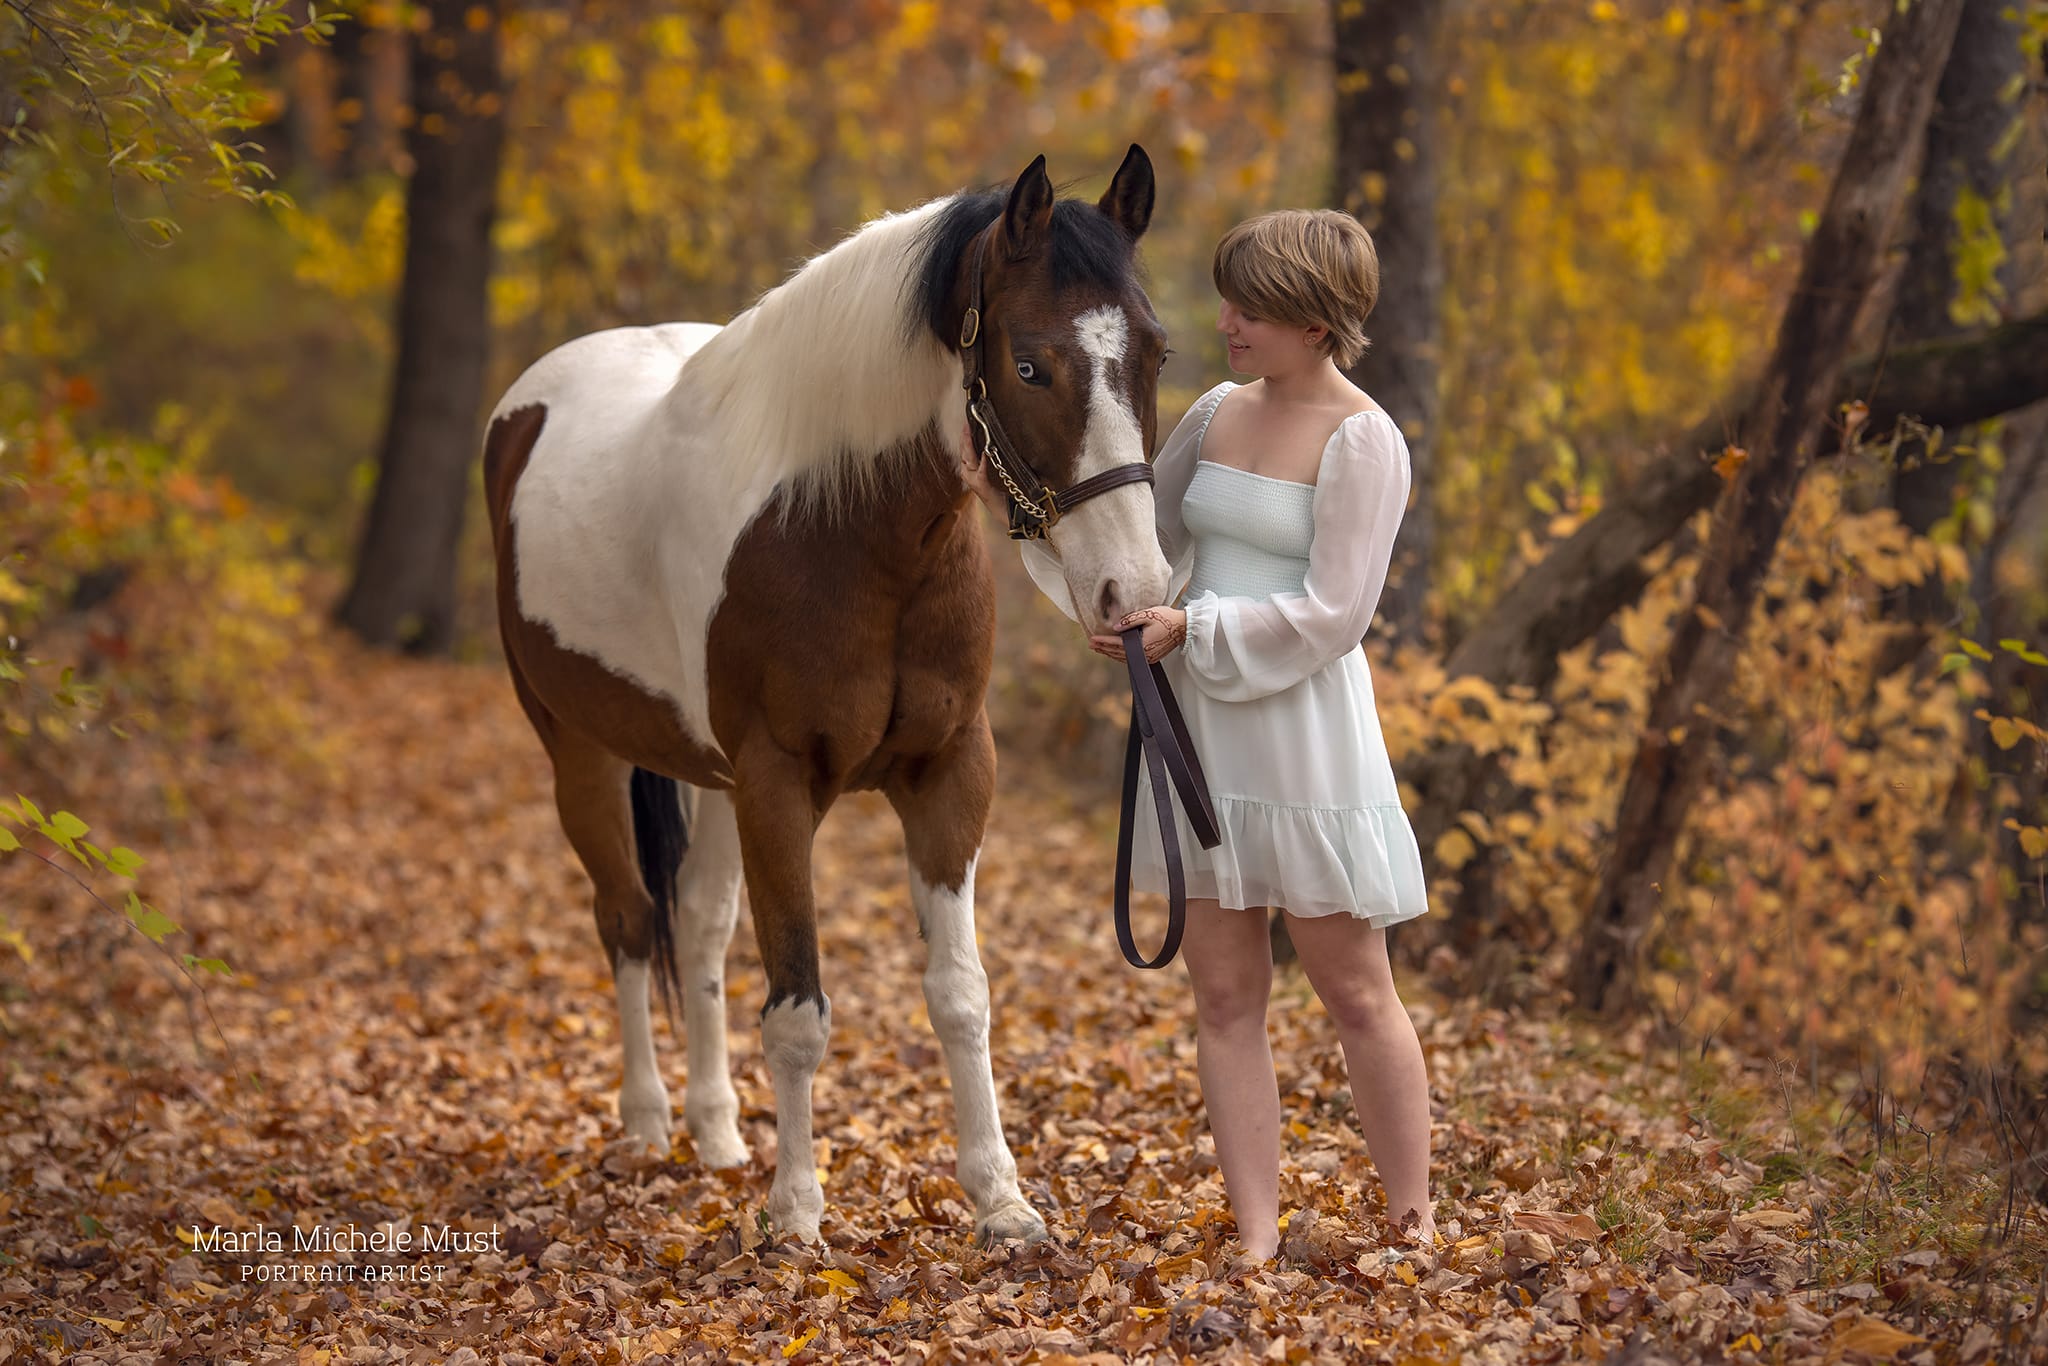 A serene photograph captured by a Detroit equine photographer unfolds as a woman stands among the fallen leaves, accompanied by a graceful horse.